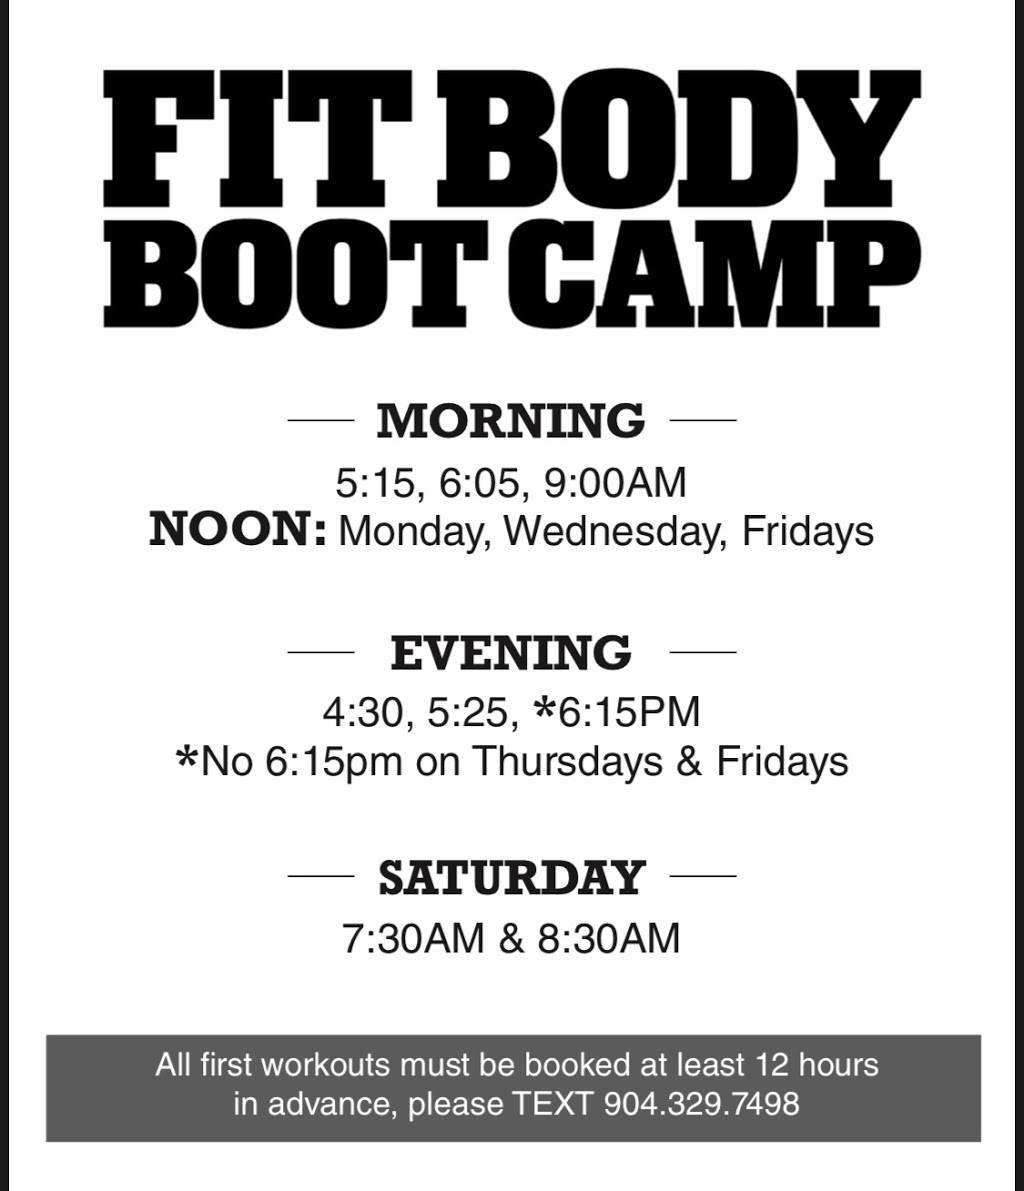 Philips Hwy Fit Body Boot Camp | 11035 Philips Hwy, Jacksonville, FL 32256 | Phone: (904) 206-7566